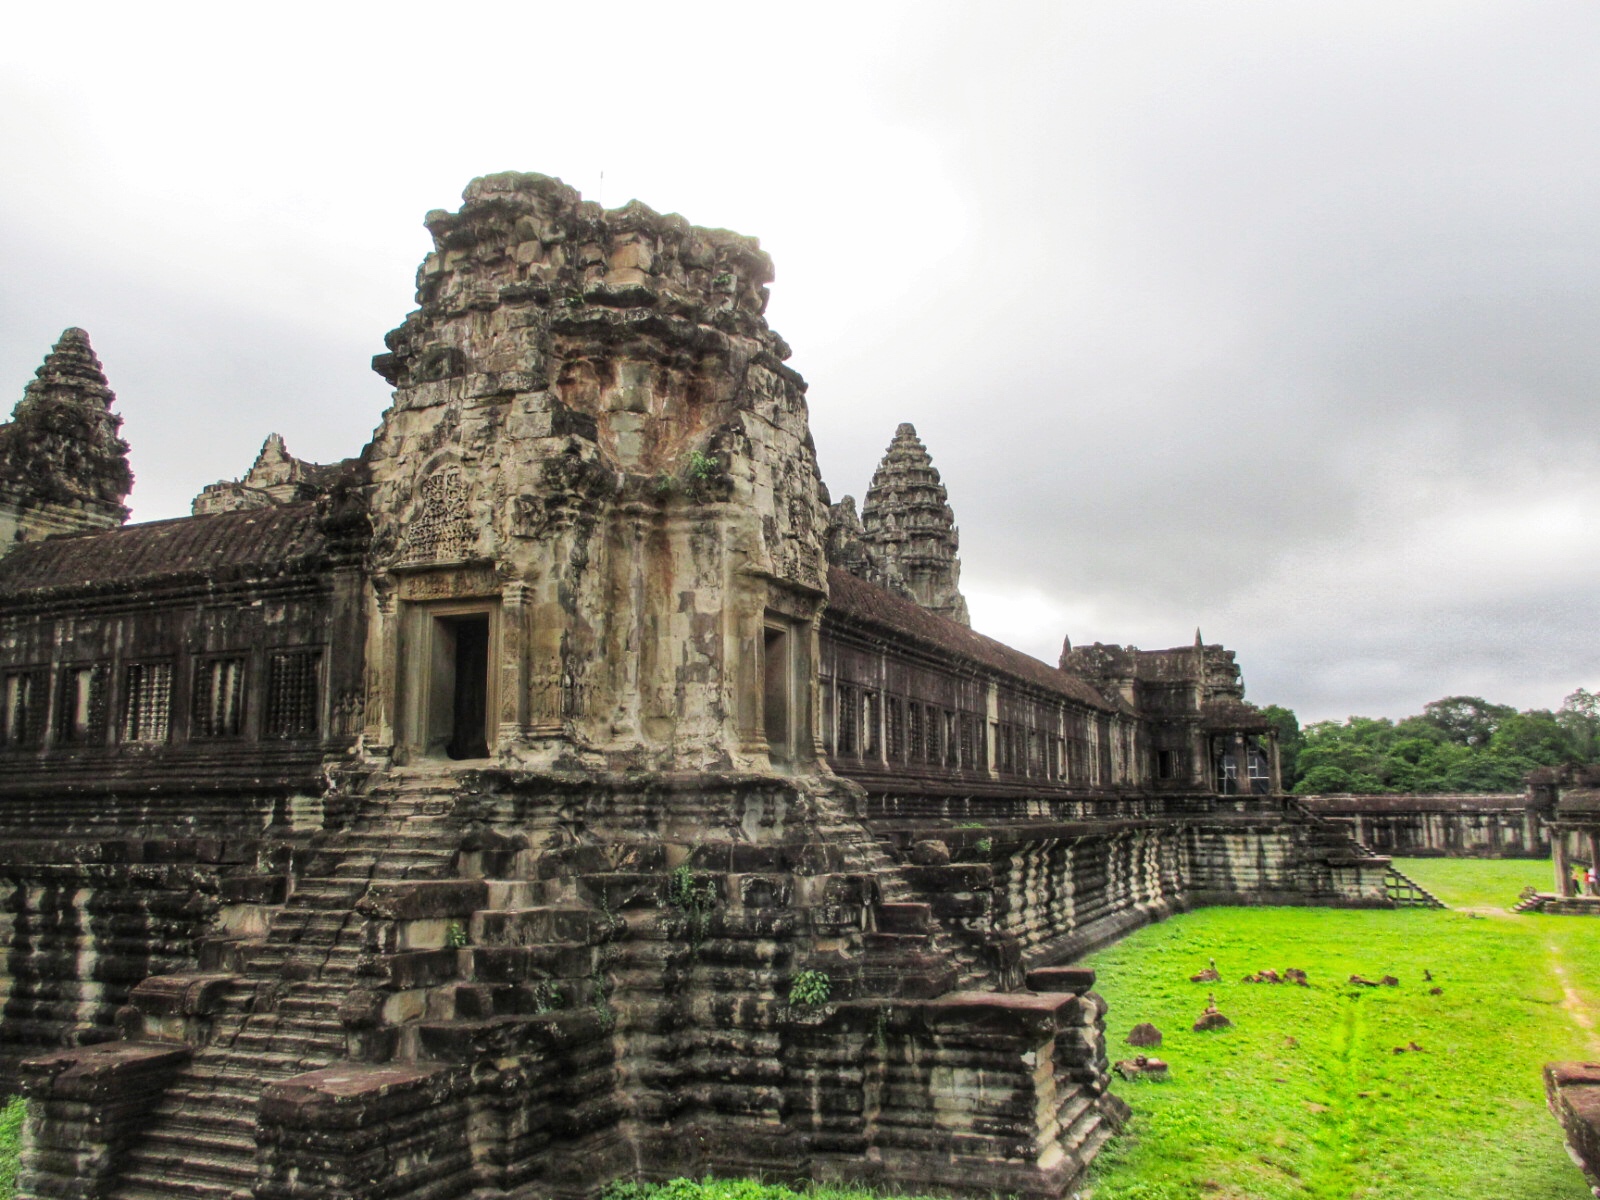 Outer view of 2-square-kilometer complex showcases the symmetry of Angkor Wat